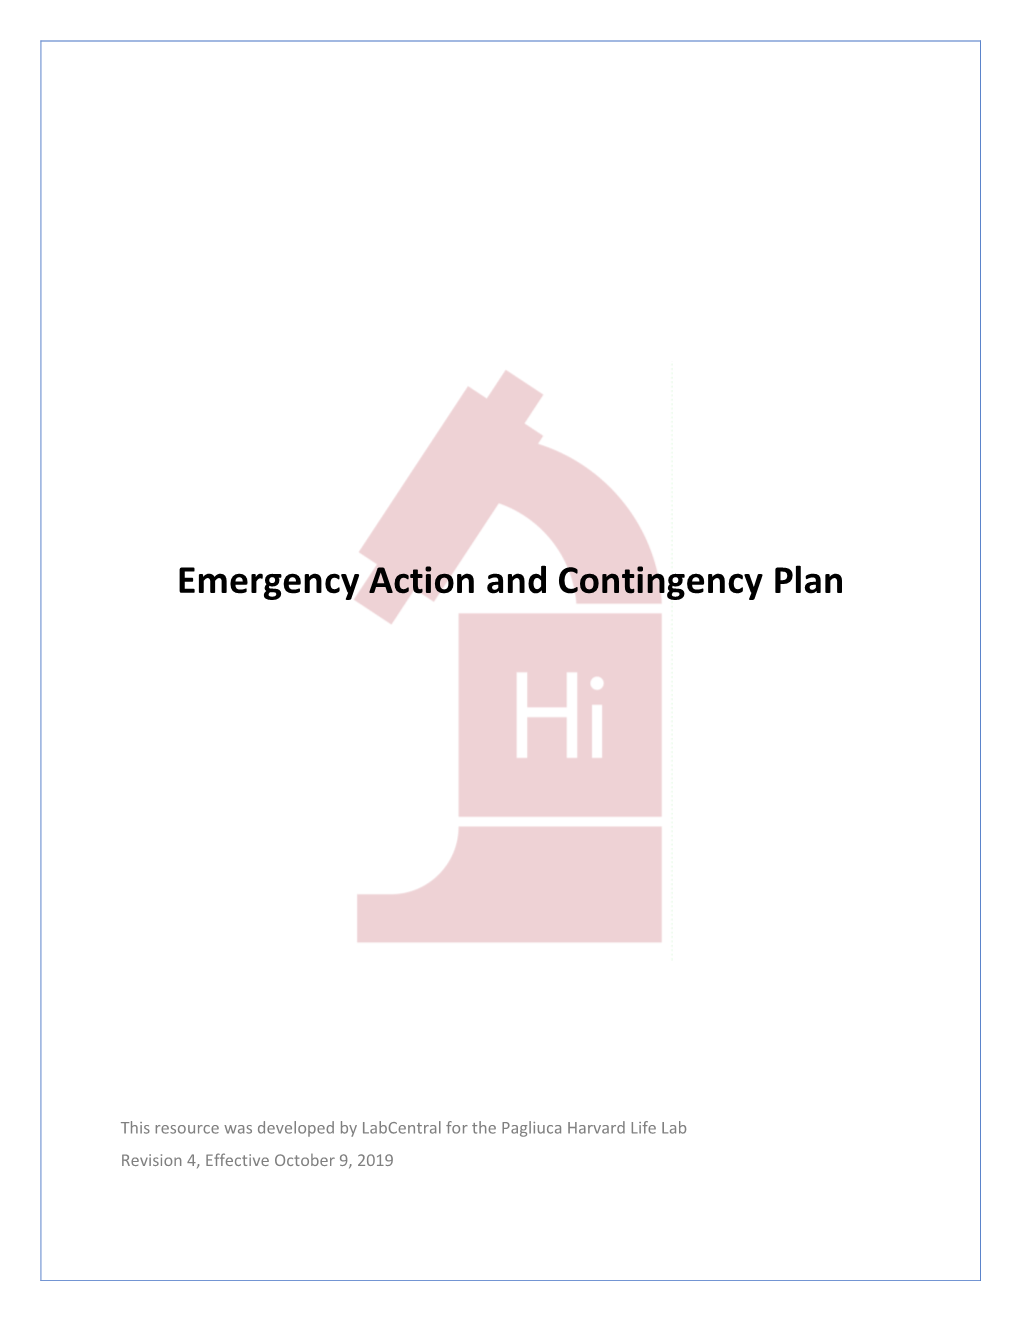 Emergency Action and Contingency Plan